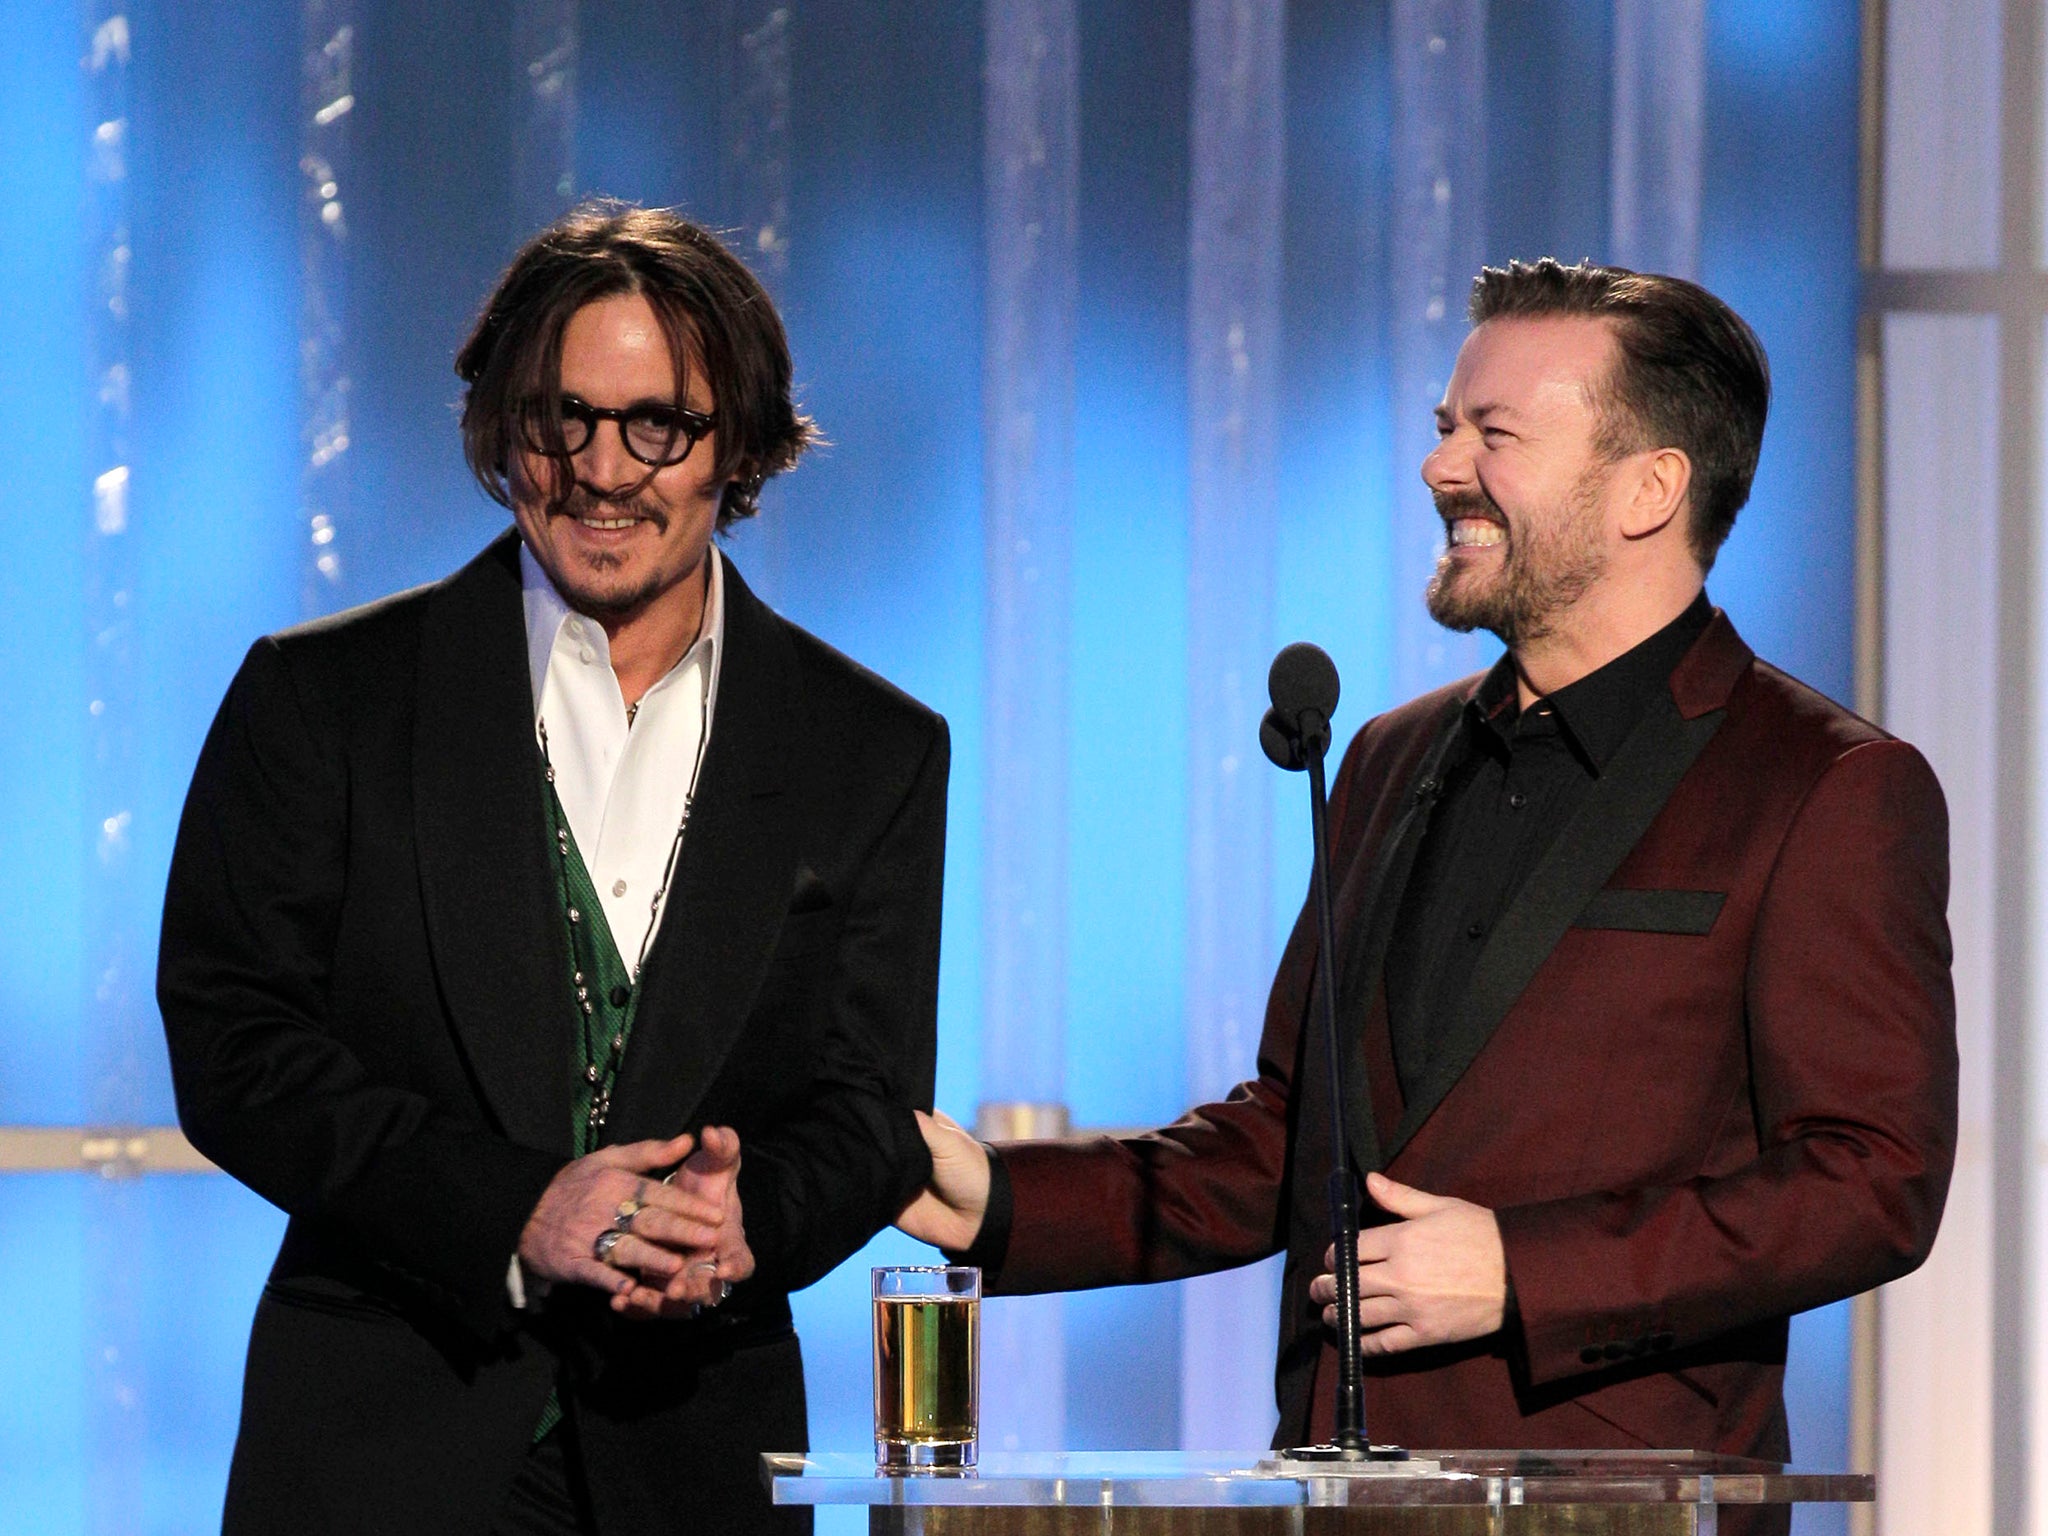 ‘The Tourist’ nominee Johnny Depp and recurring Golden Globes host Ricky Gervais at the 2012 Globes